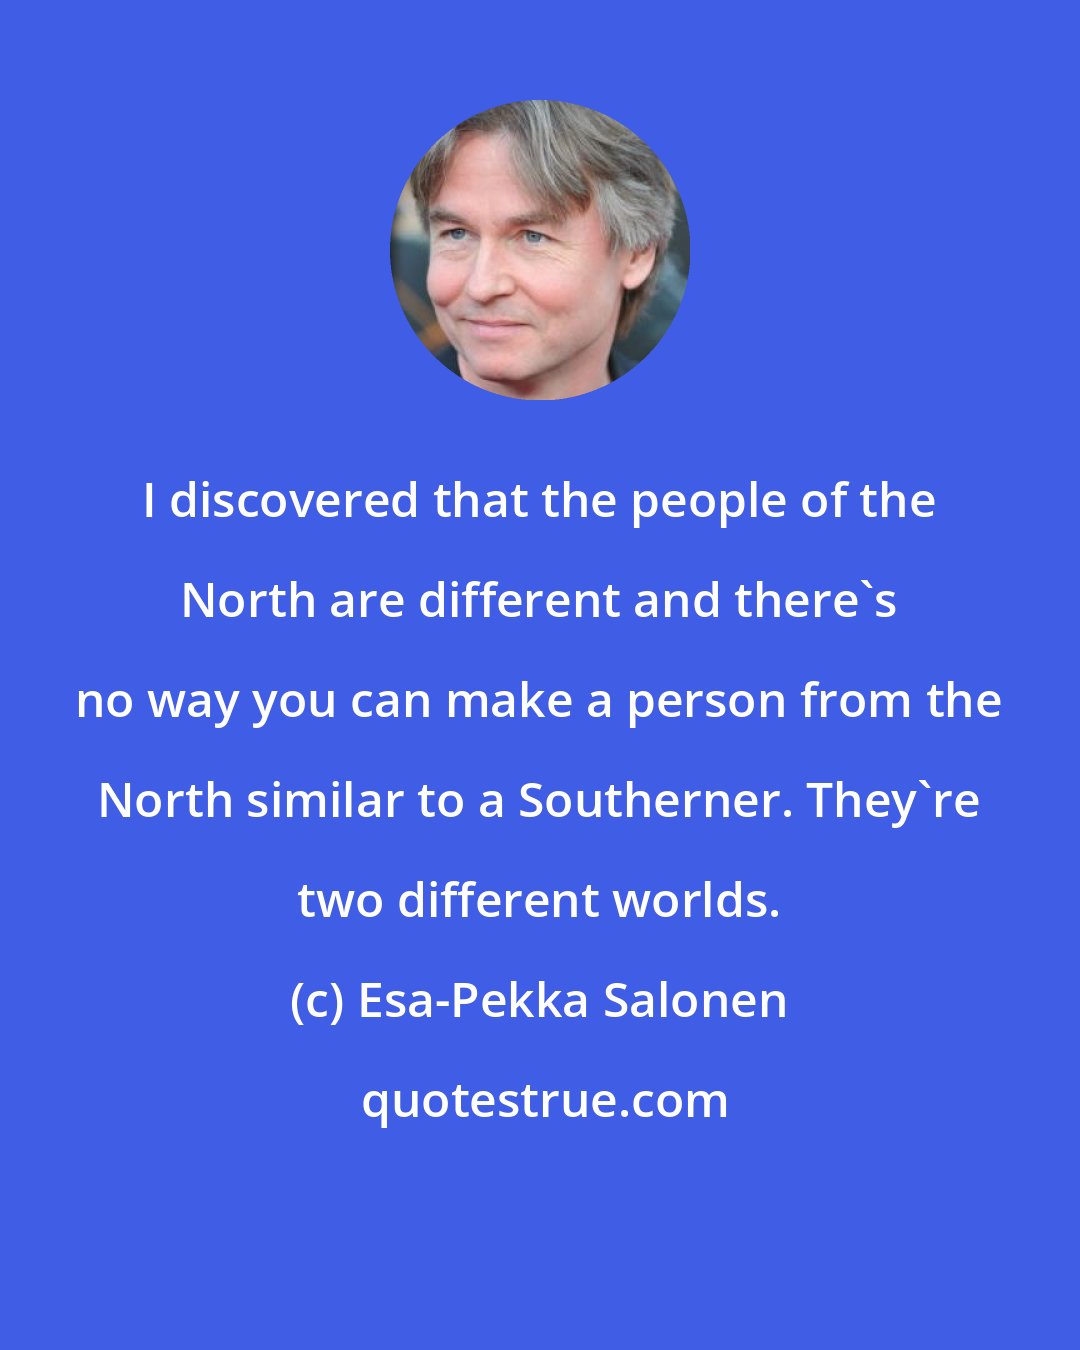 Esa-Pekka Salonen: I discovered that the people of the North are different and there's no way you can make a person from the North similar to a Southerner. They're two different worlds.